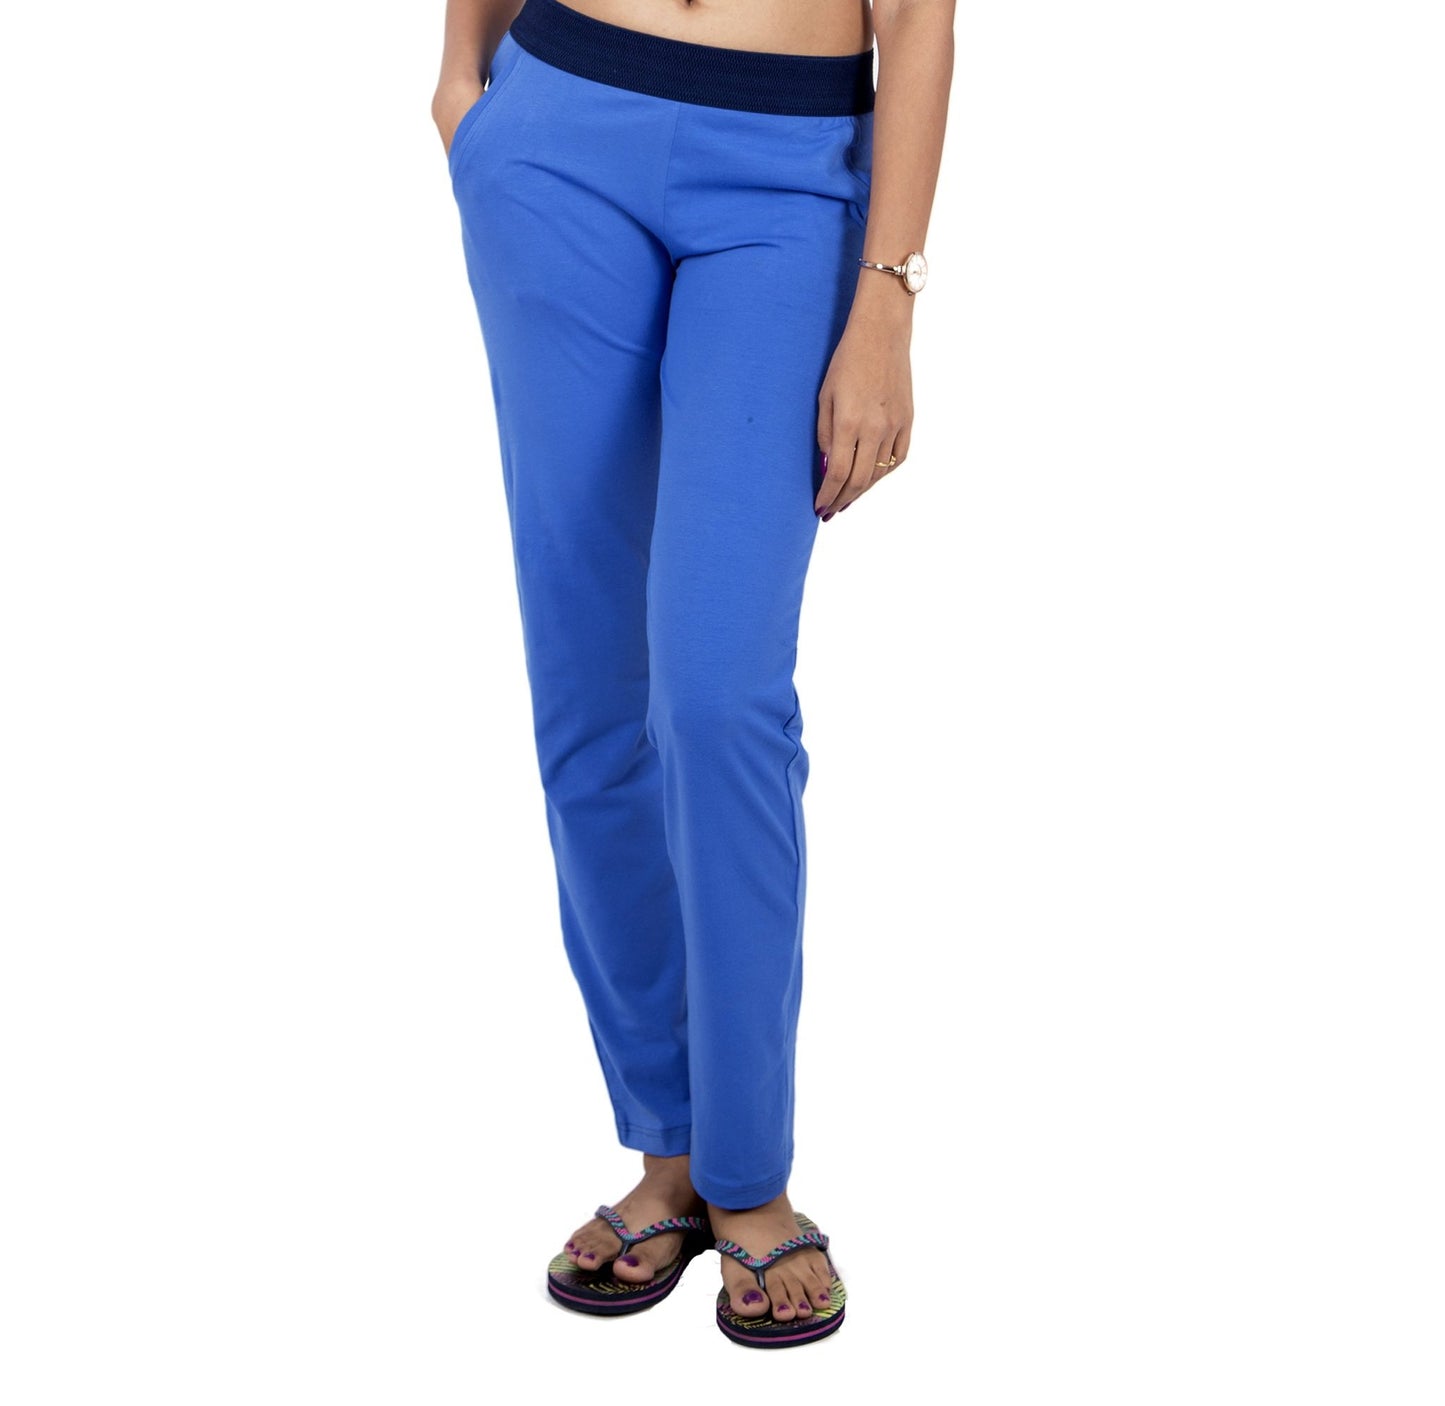 blue-yoga-pants-with-pockets-for-ladies-online